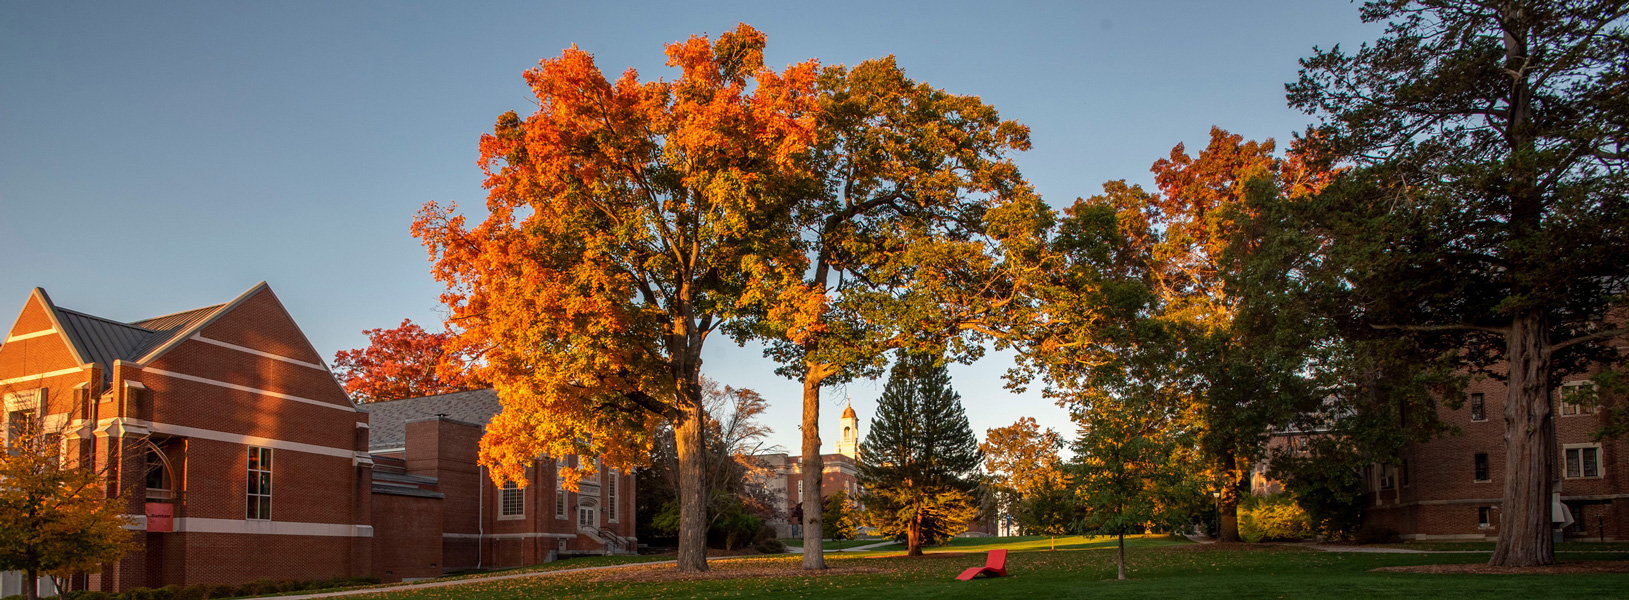 Students walking near the William Benton Museum of Art during the fall.